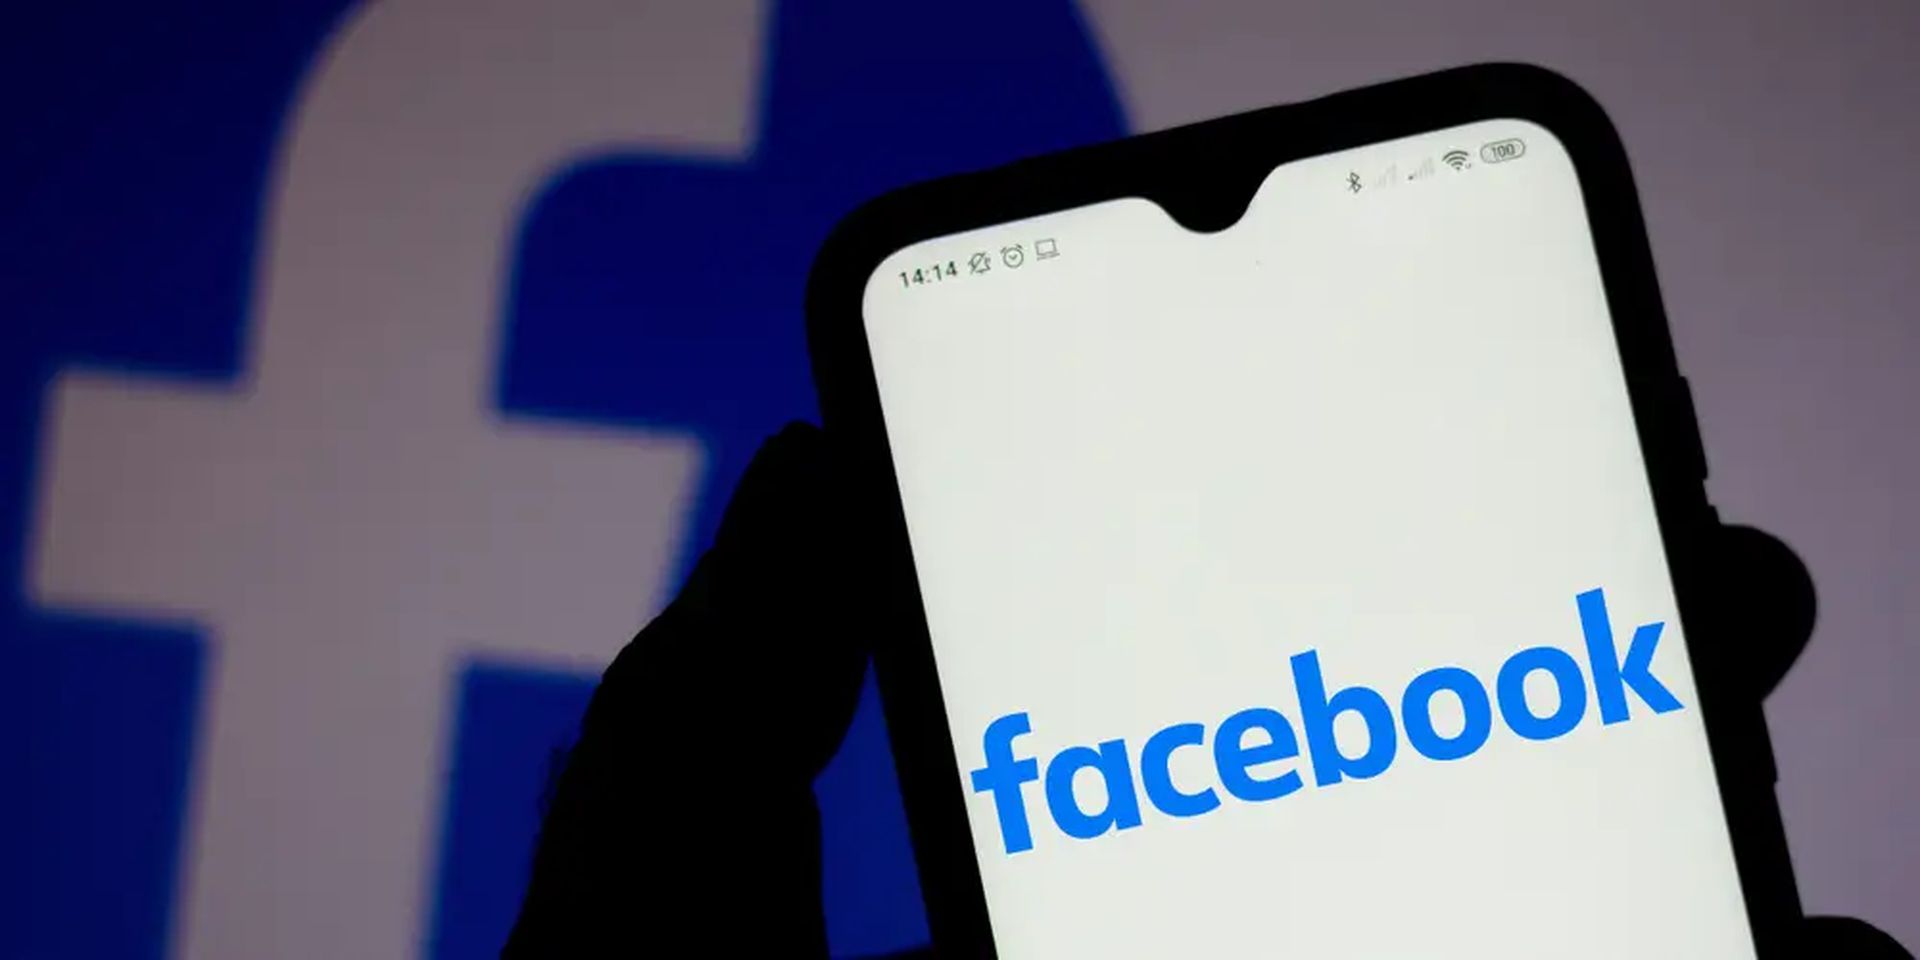 In this article, we are going to be covering how to delete Story on Facebook, so you can get rid of any Story that is up or archived.